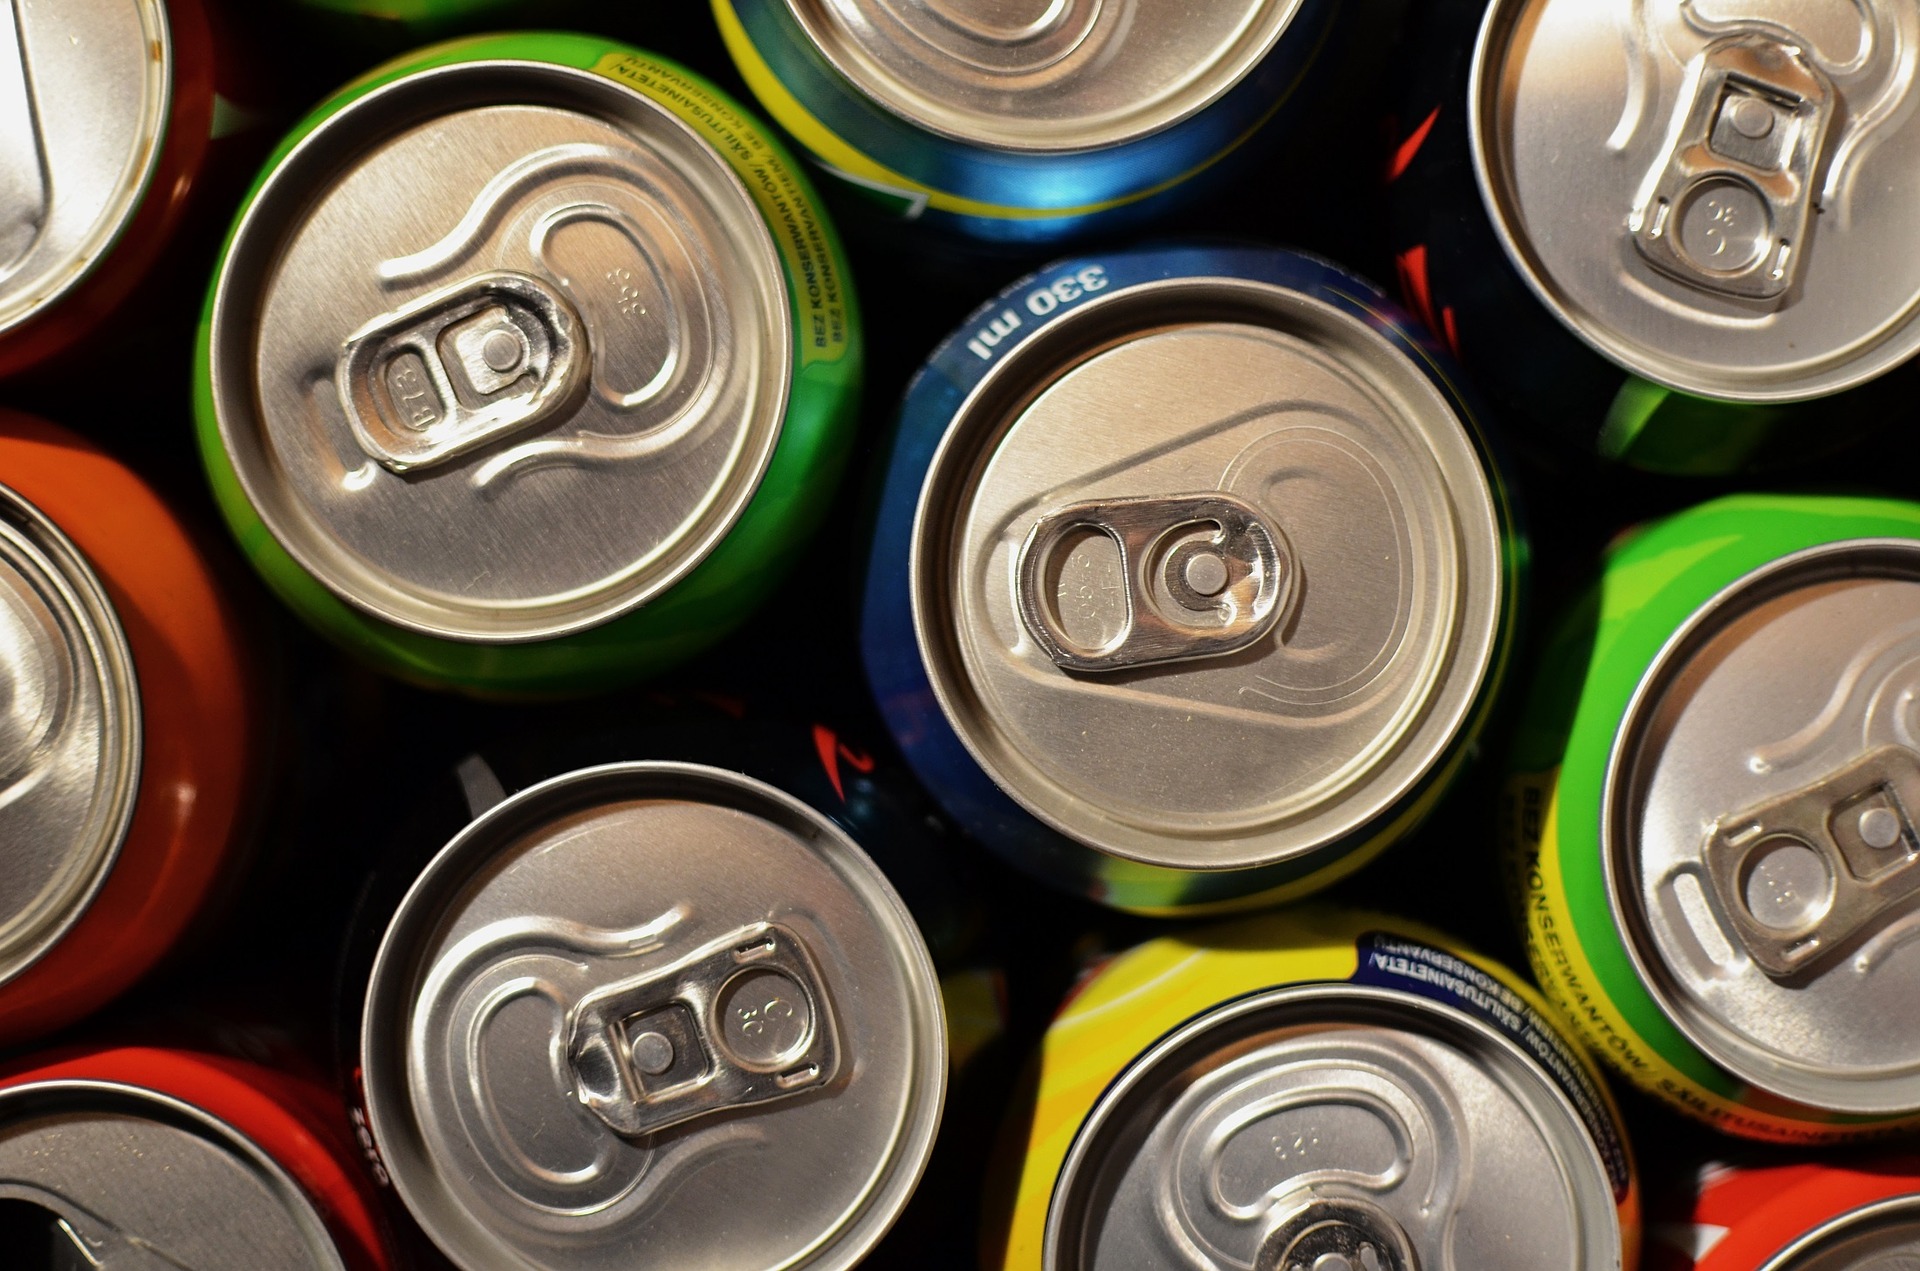 Artificial sweeteners in packaged beverages increase the risk of heart disease